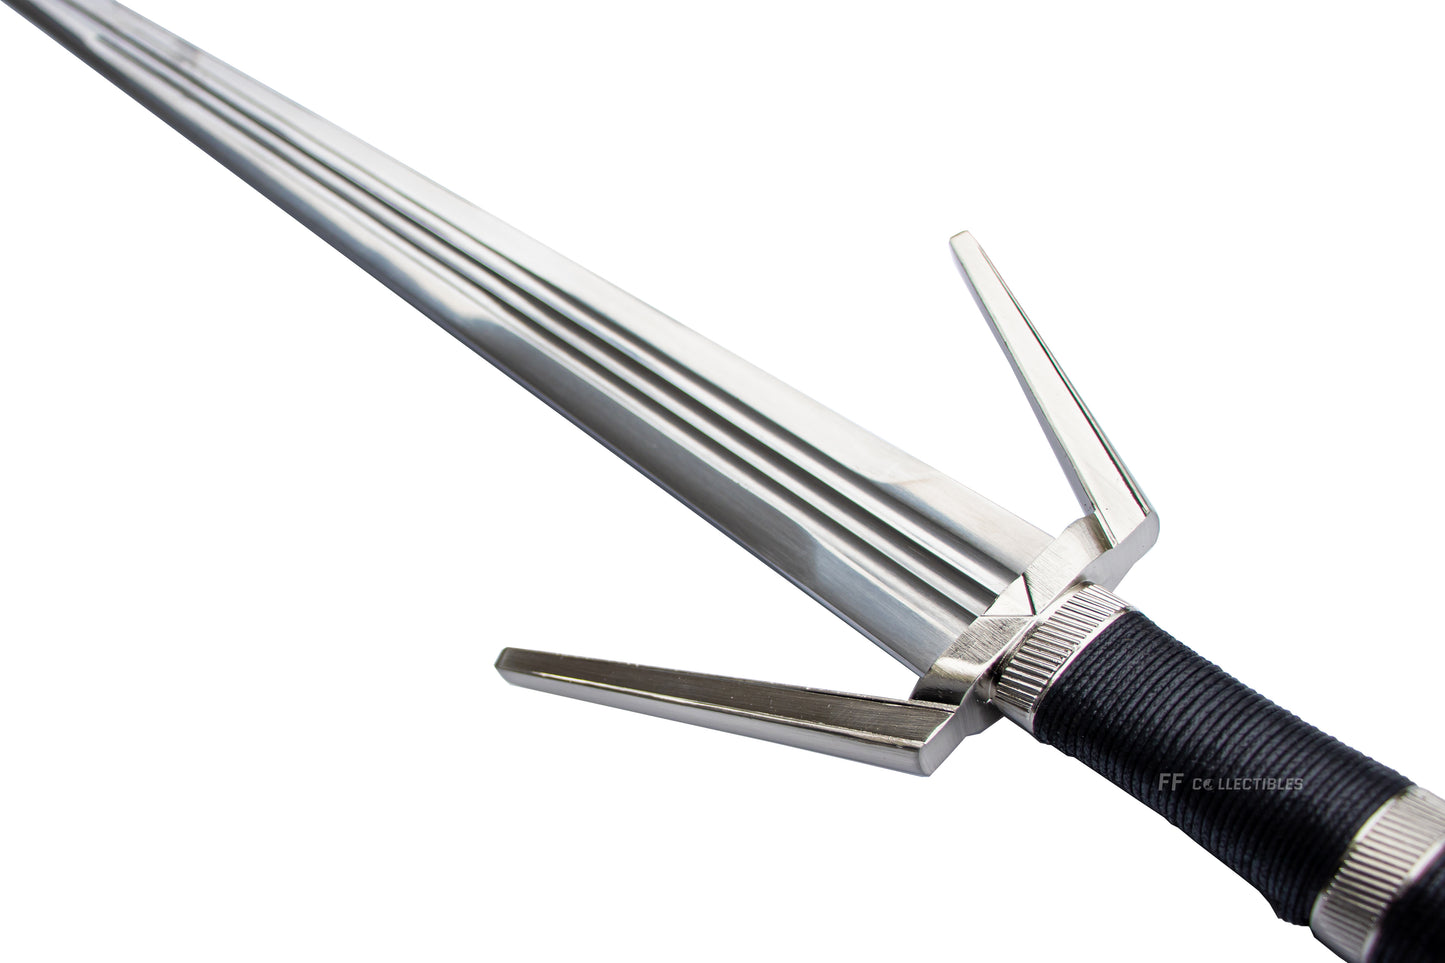 THE WITCHER - GERALT OF RIVIA'S WOLVEN SILVER SWORD